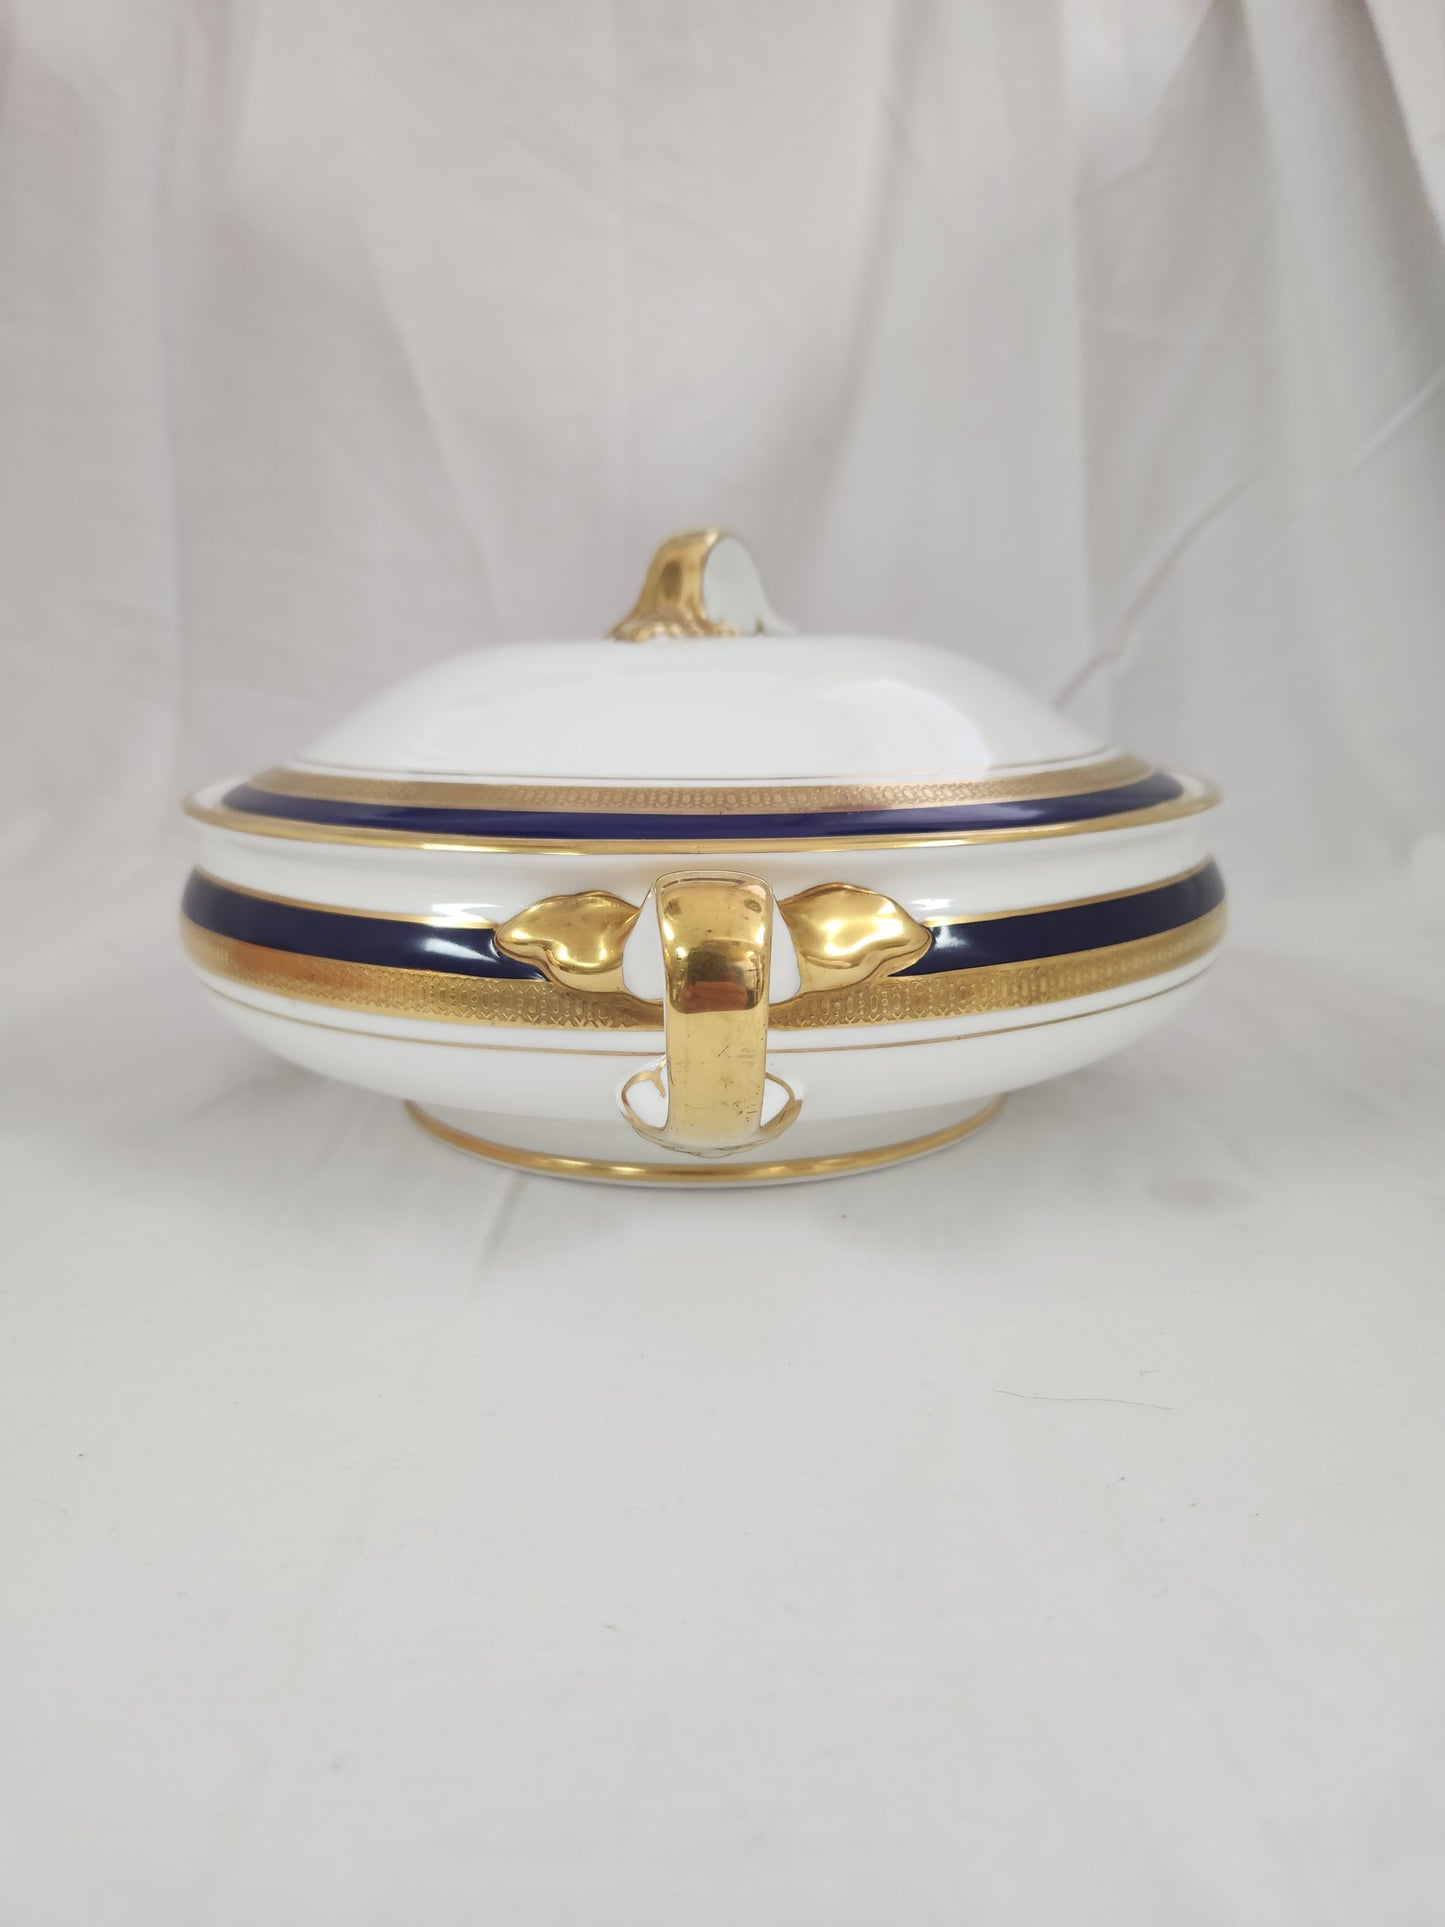 Aynsley Cobalt Royale Bone China Round Vegetable Bowl with Lid - Green Back Stamp